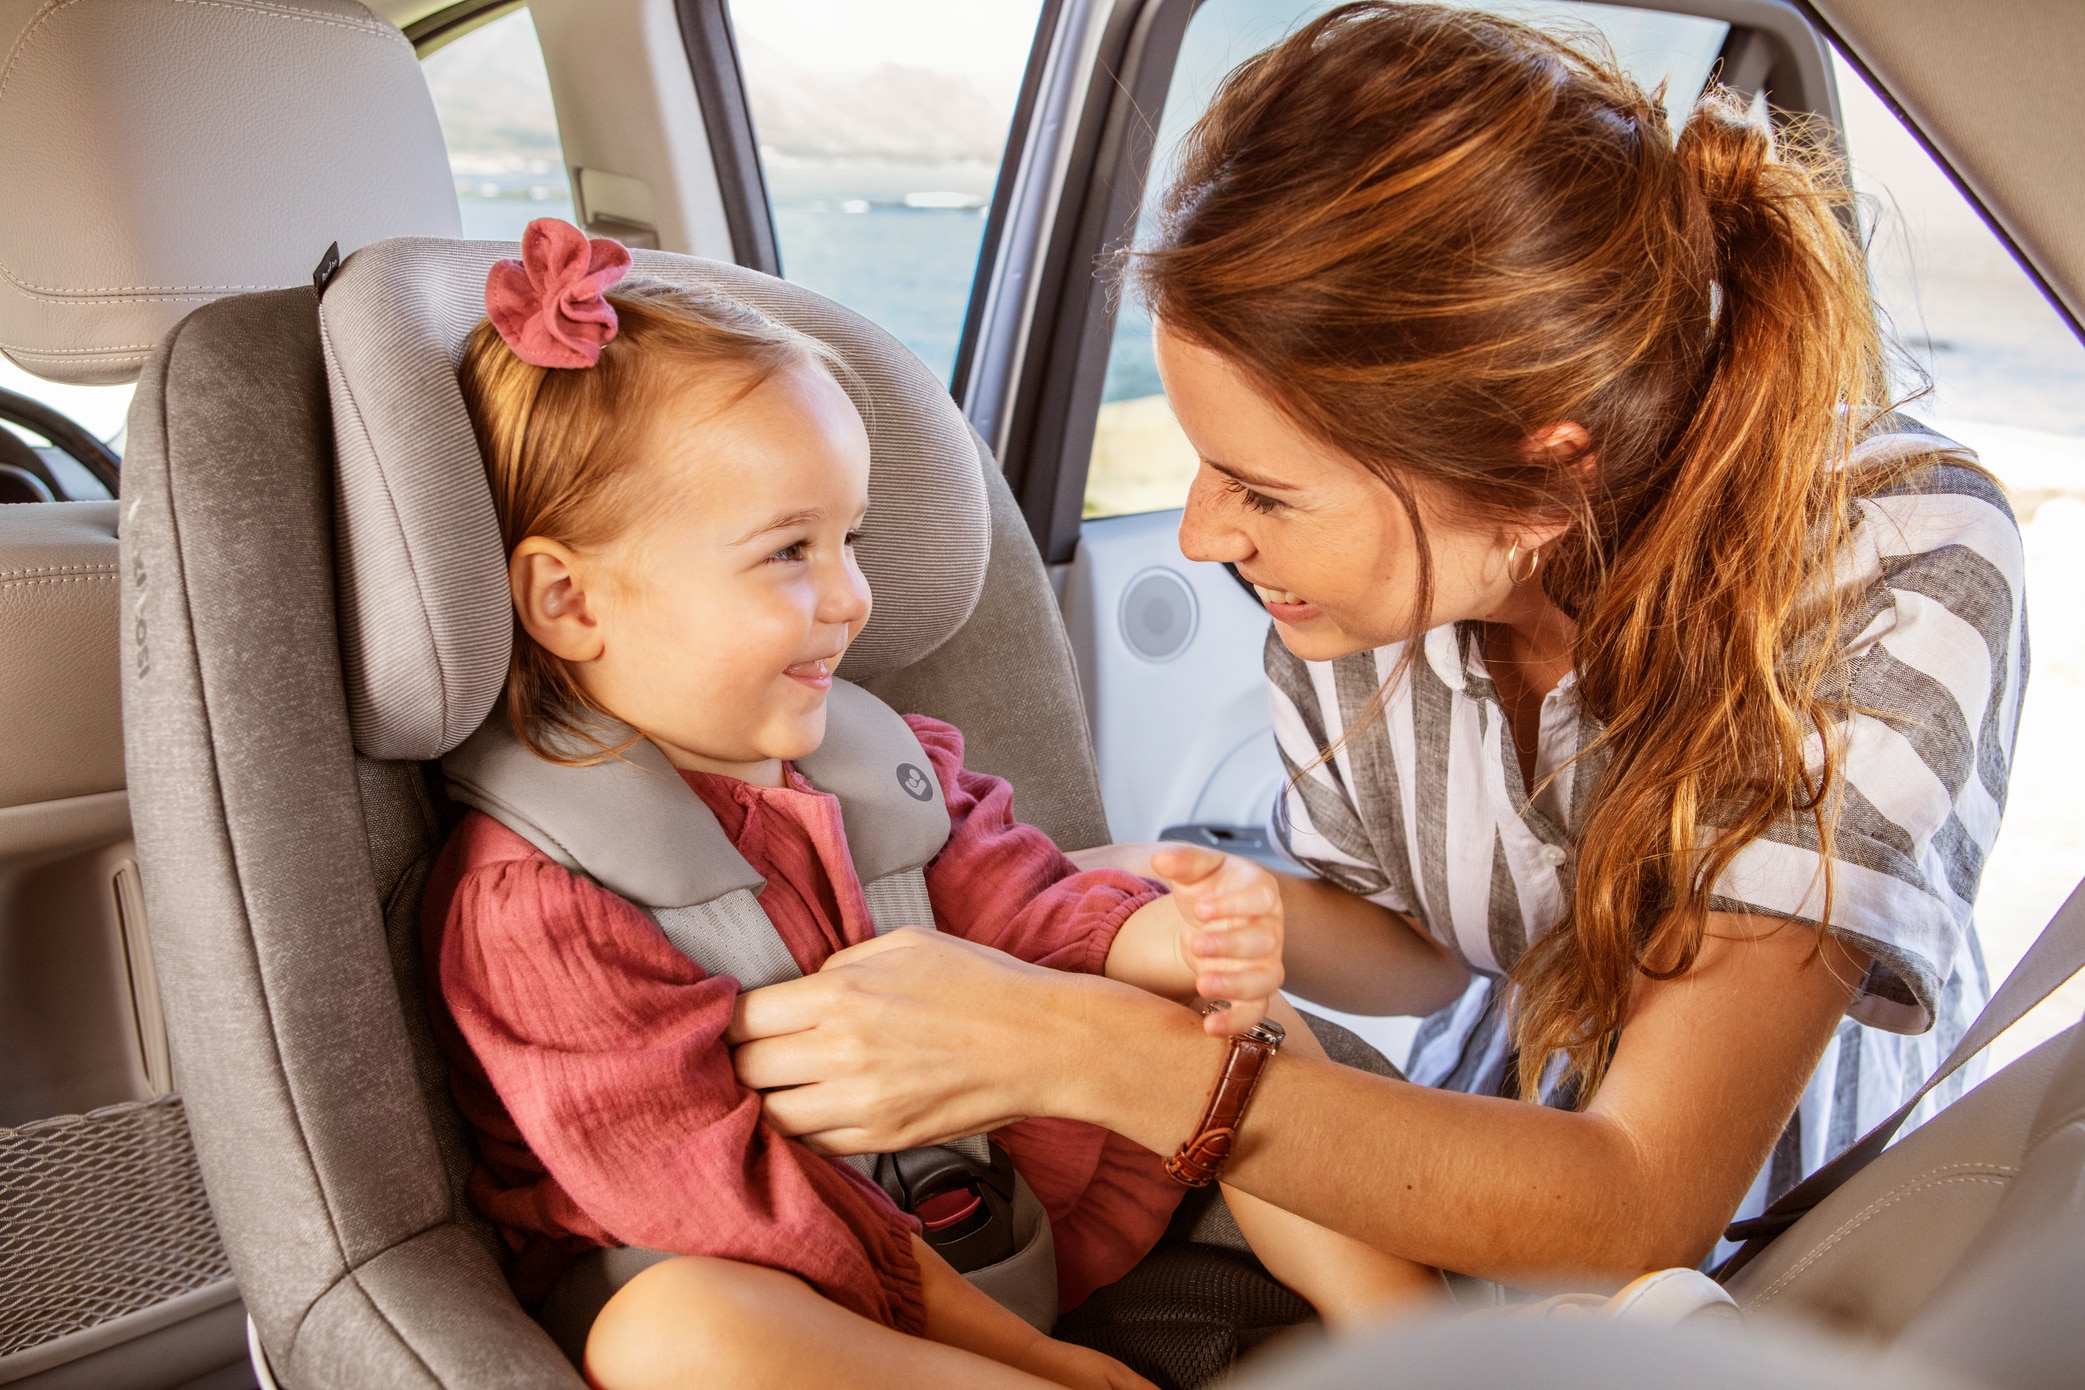 https://images.maxi-cosi.de/m/2131d13be11a78d/PNG_72_DPI-MC8494_2020_Maxicosi_carseat_e-Safety_Lifestyle_Spring_Momandgirlincarsmiling_Landscape_RGB.png